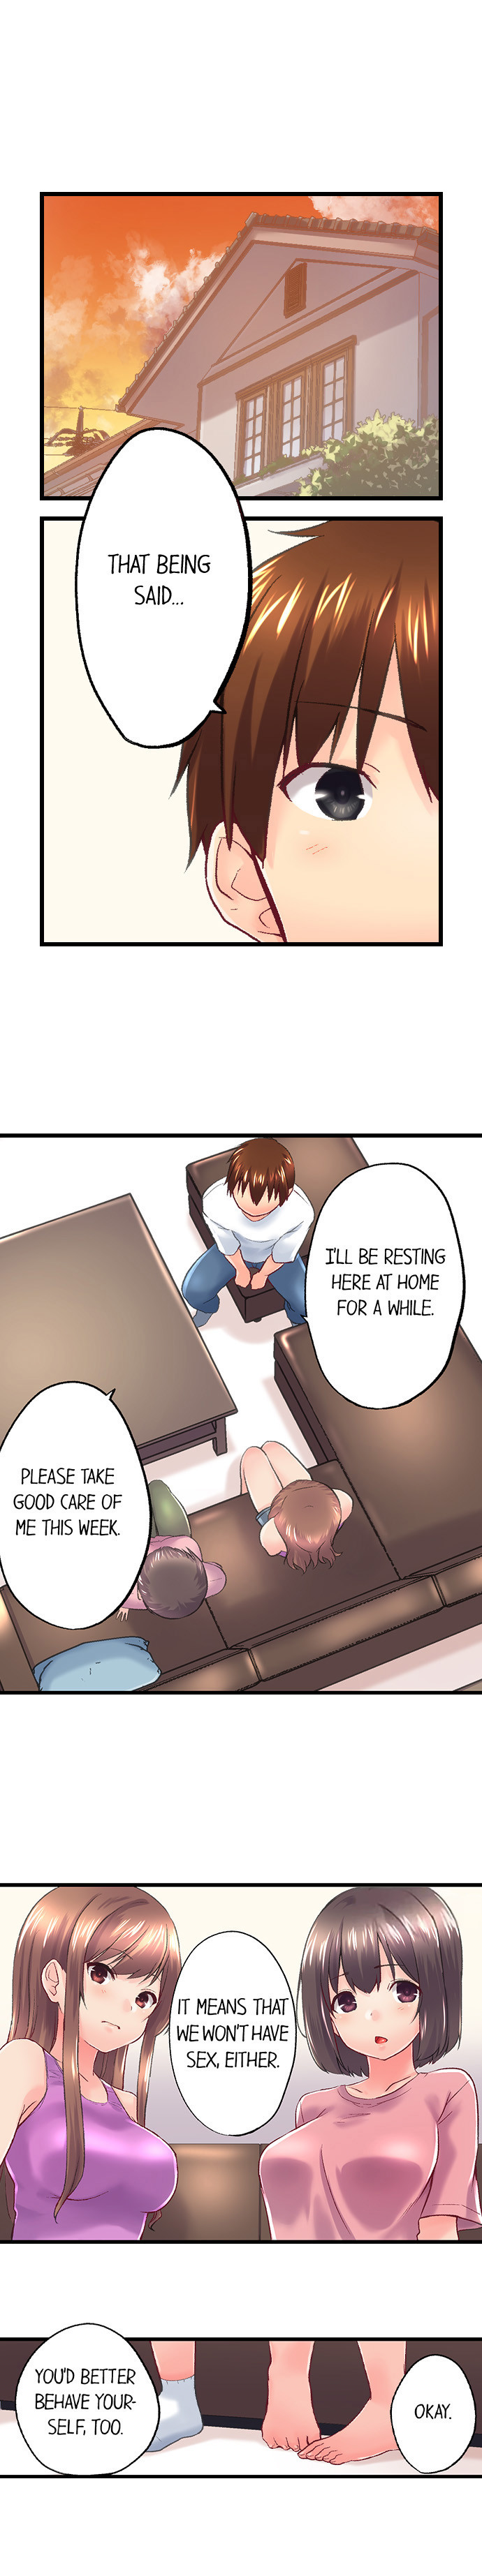 My Brother’s Slipped Inside Me in The Bathtub - Chapter 106 Page 4